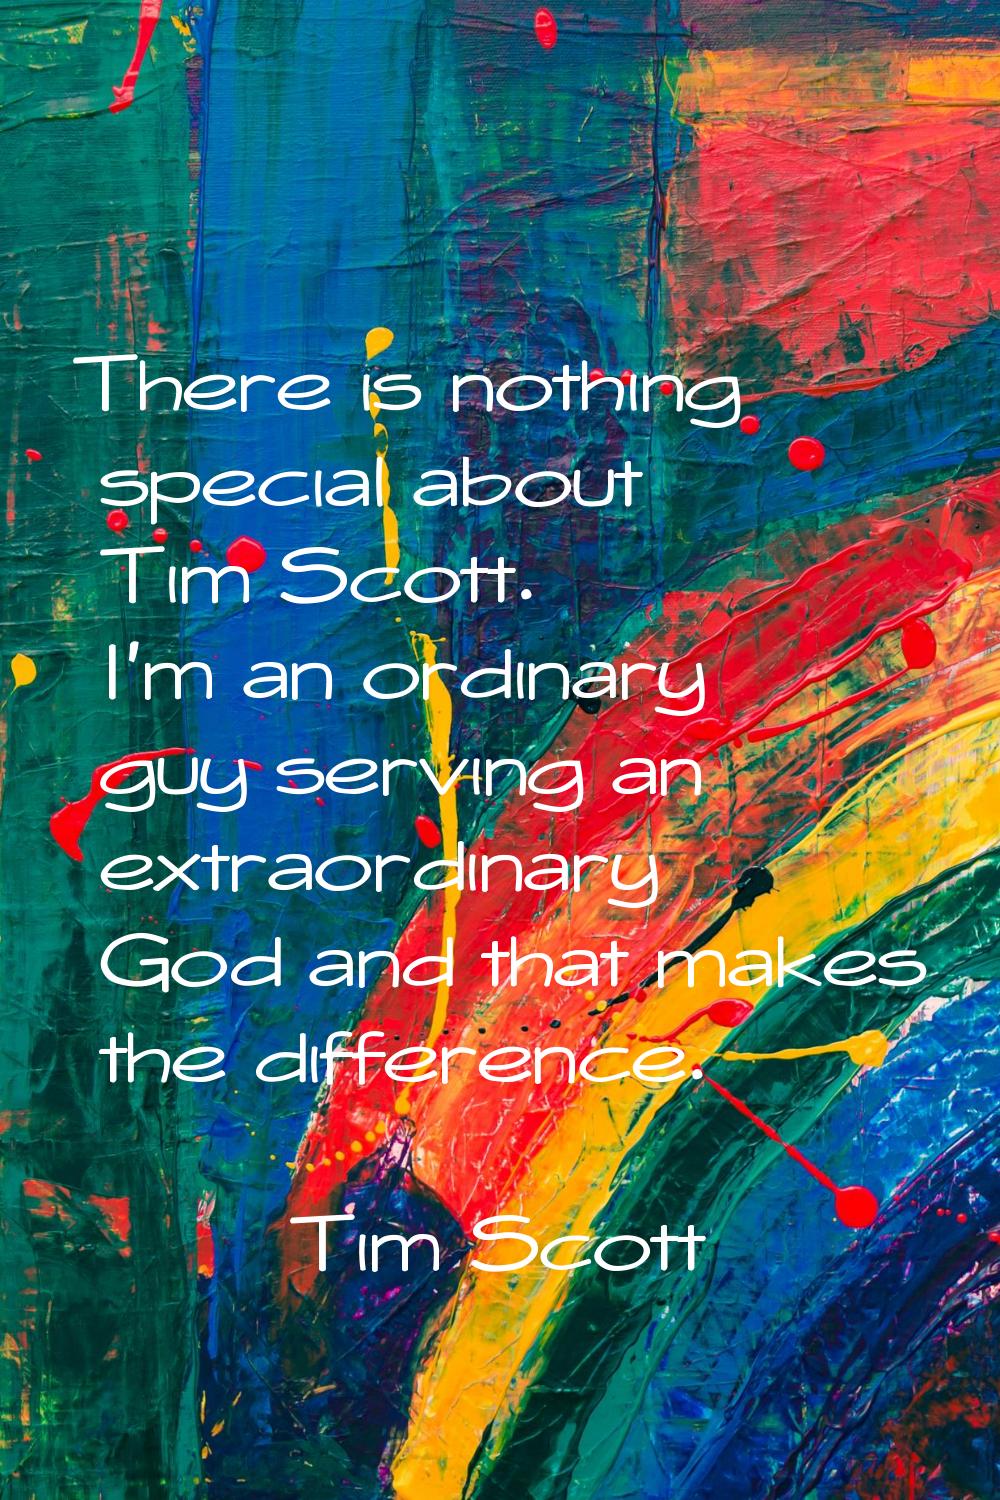 There is nothing special about Tim Scott. I'm an ordinary guy serving an extraordinary God and that